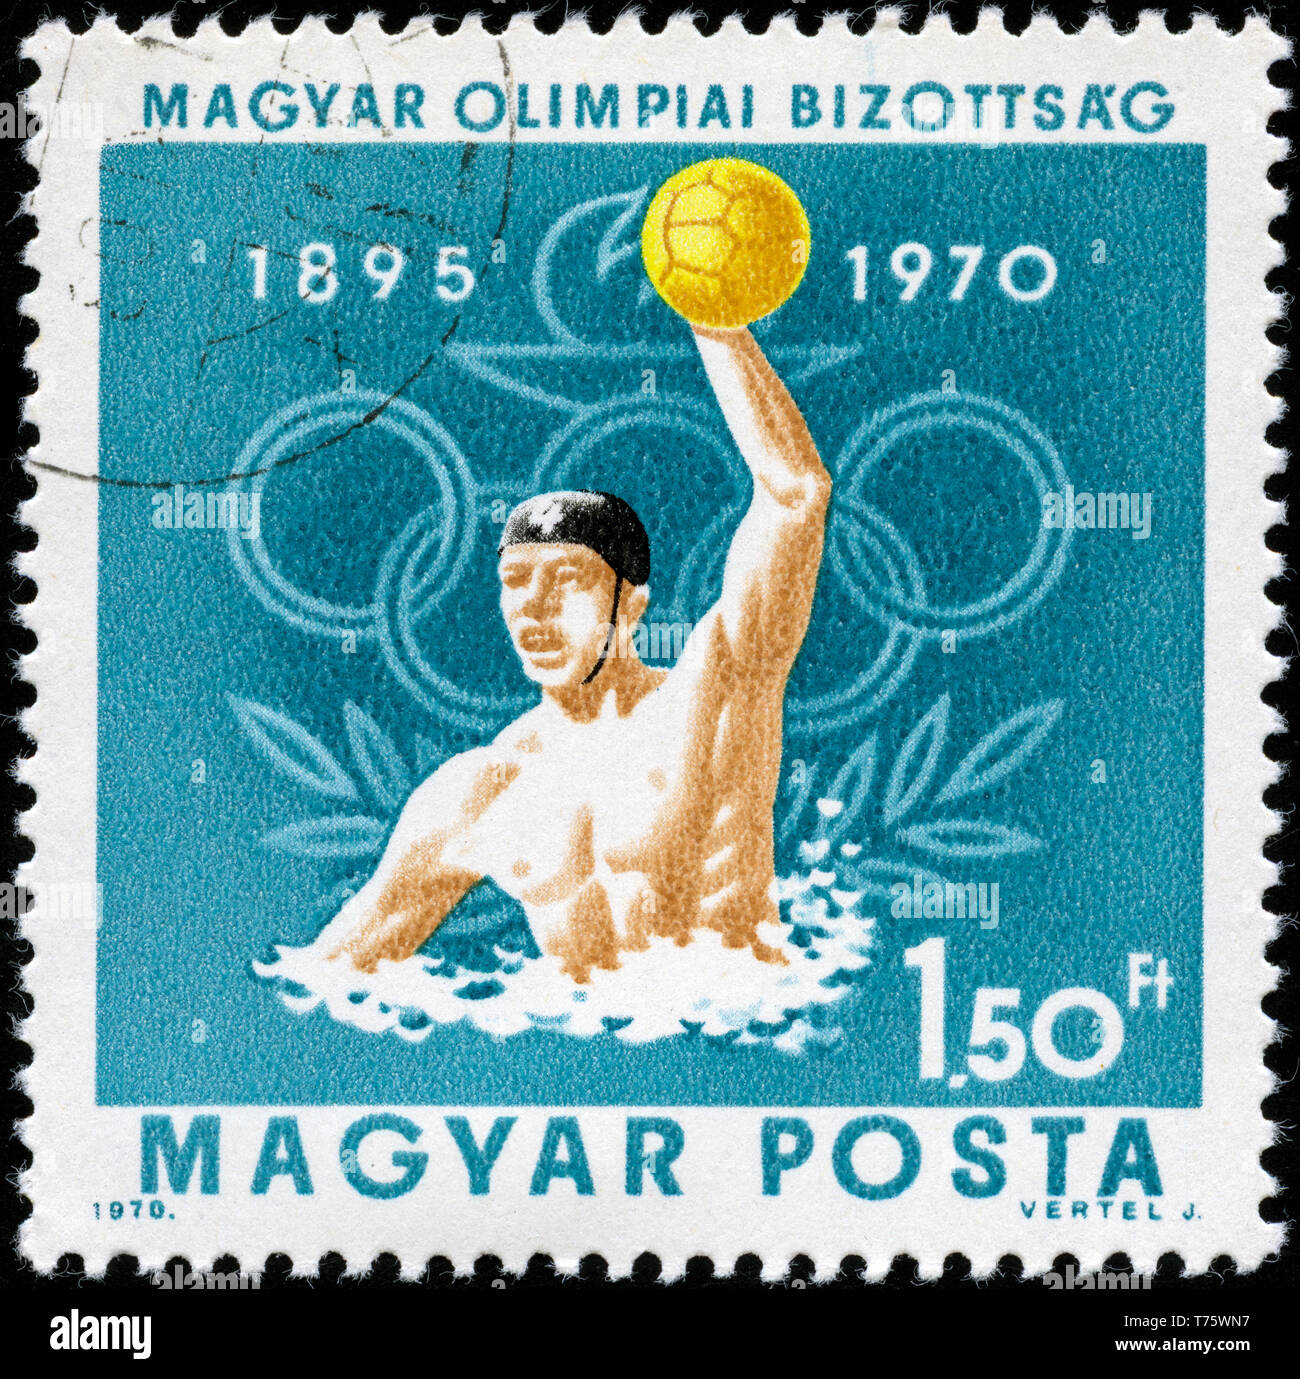 Postage stamp from Hungary in the 75 Years of Hungarian Olympic Committee series issued in 1970 Stock Photo